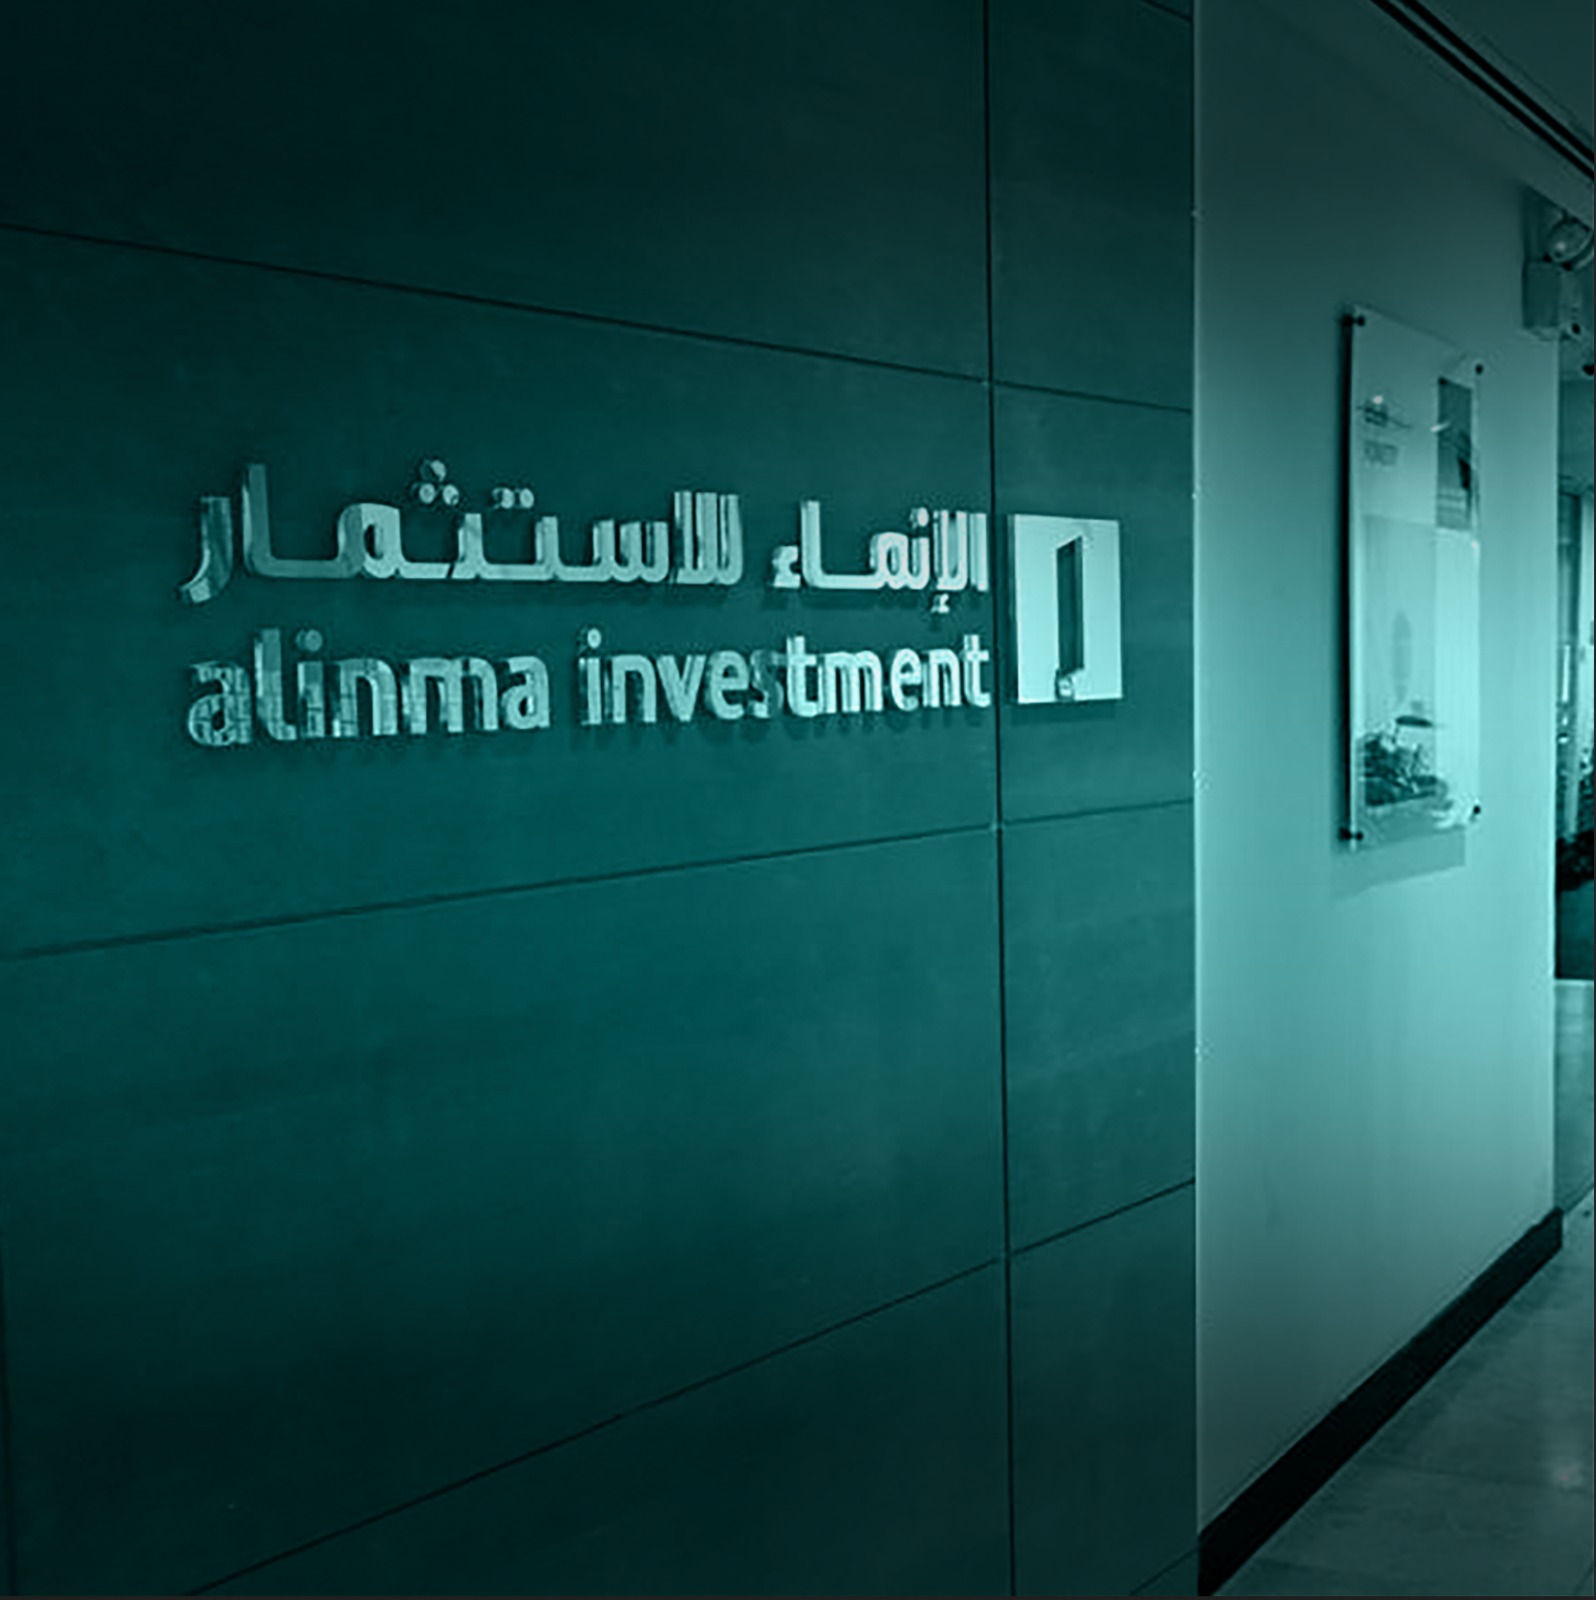 Semiannual reports of the assets of Alinma Retail REIT Fund